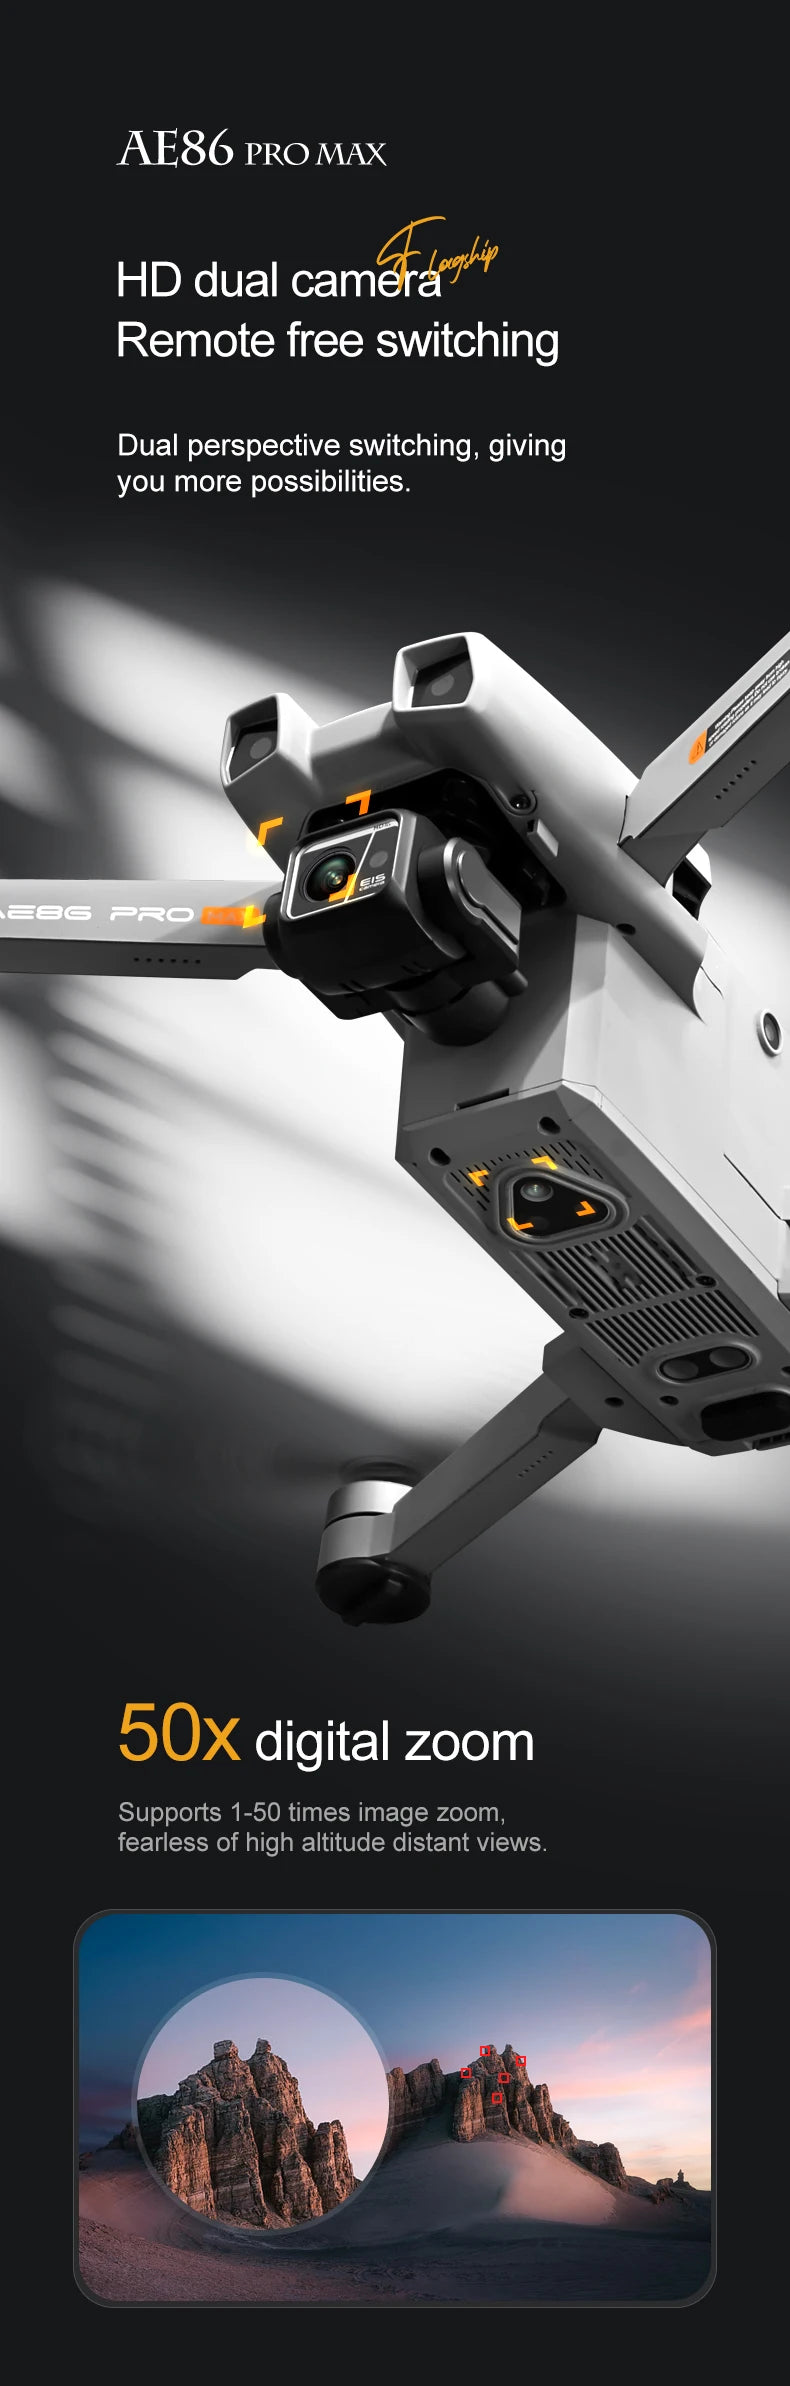 AE86 Pro Max Drone, AEBS P7O 50x digital zoom Supports 1-50 times image zoom .